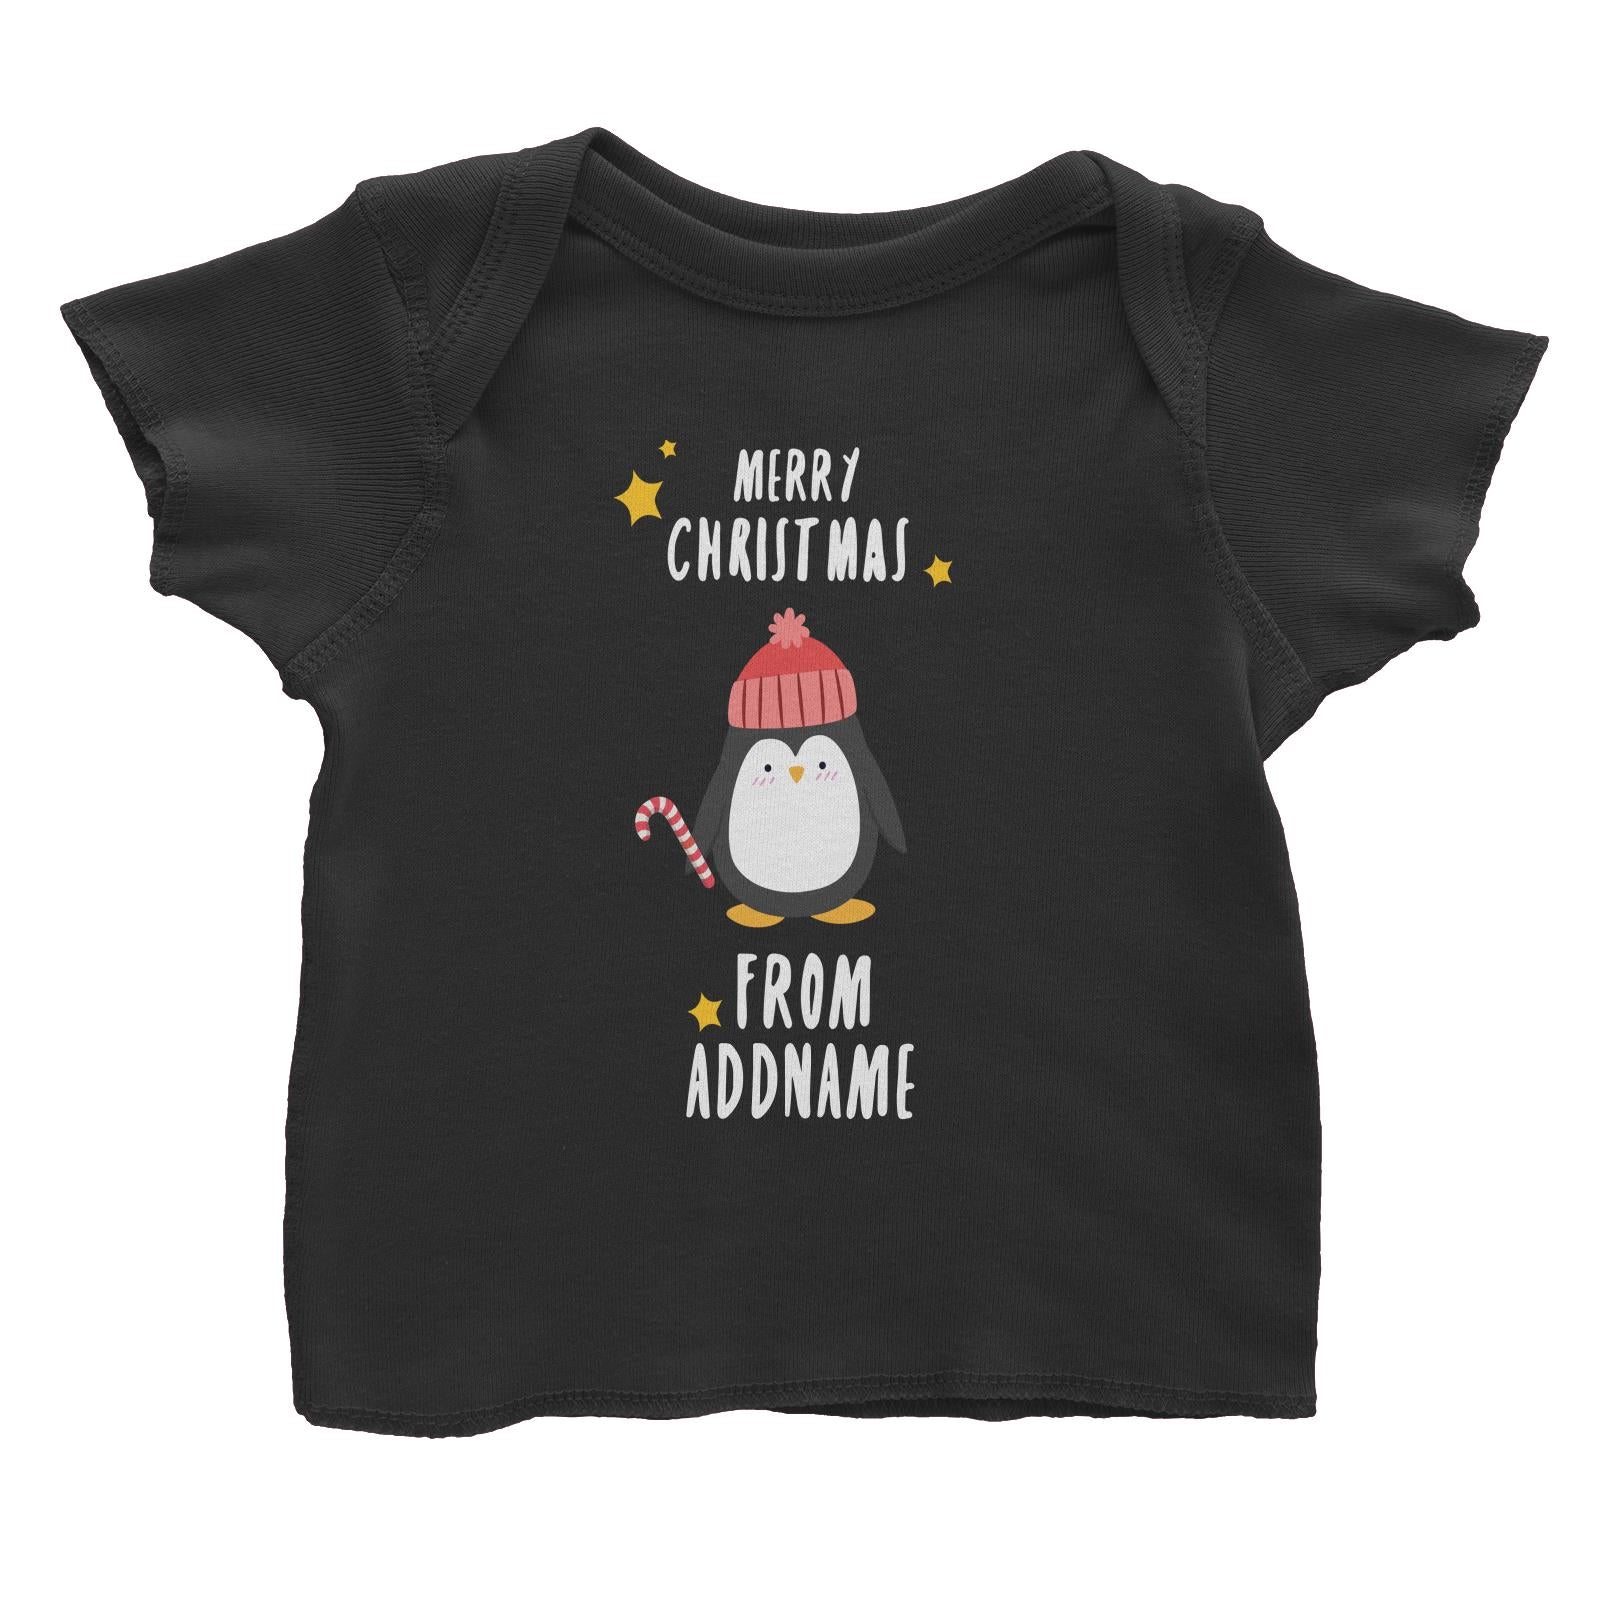 Cute Penguin Merry Christmas Greeting Addname Baby T-Shirt  Animal Personalizable Designs Matching Family